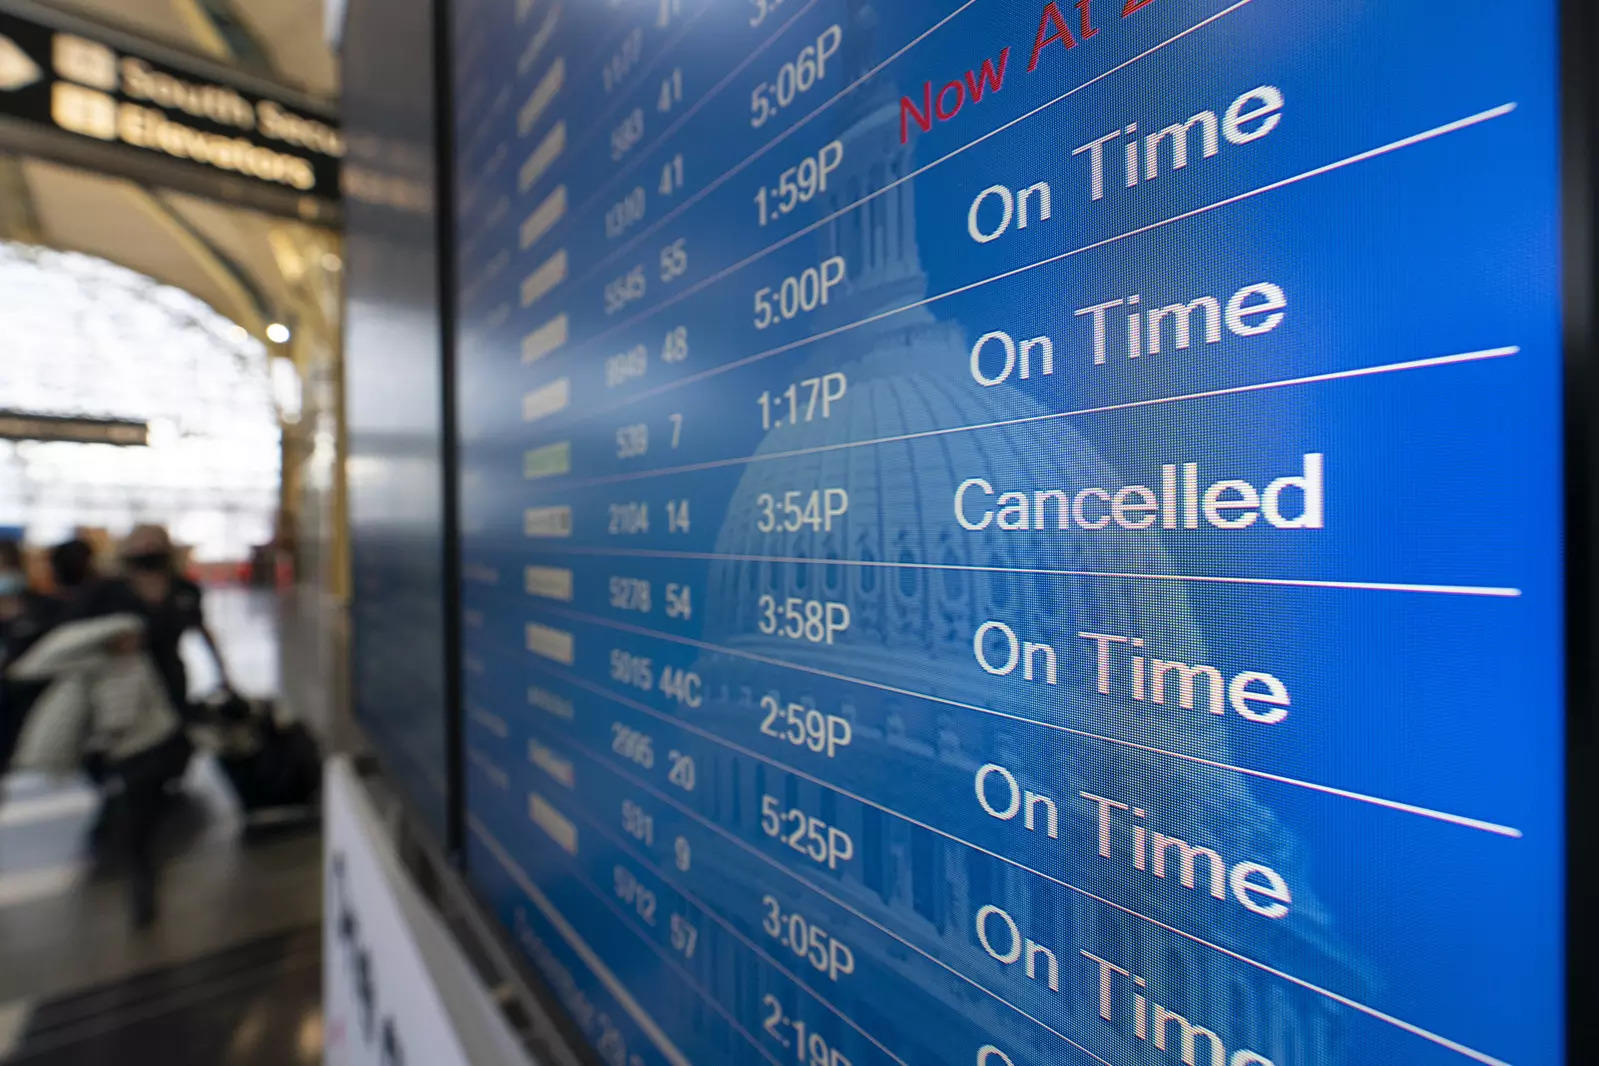 Explainer: Why are so many flights being cancelled?